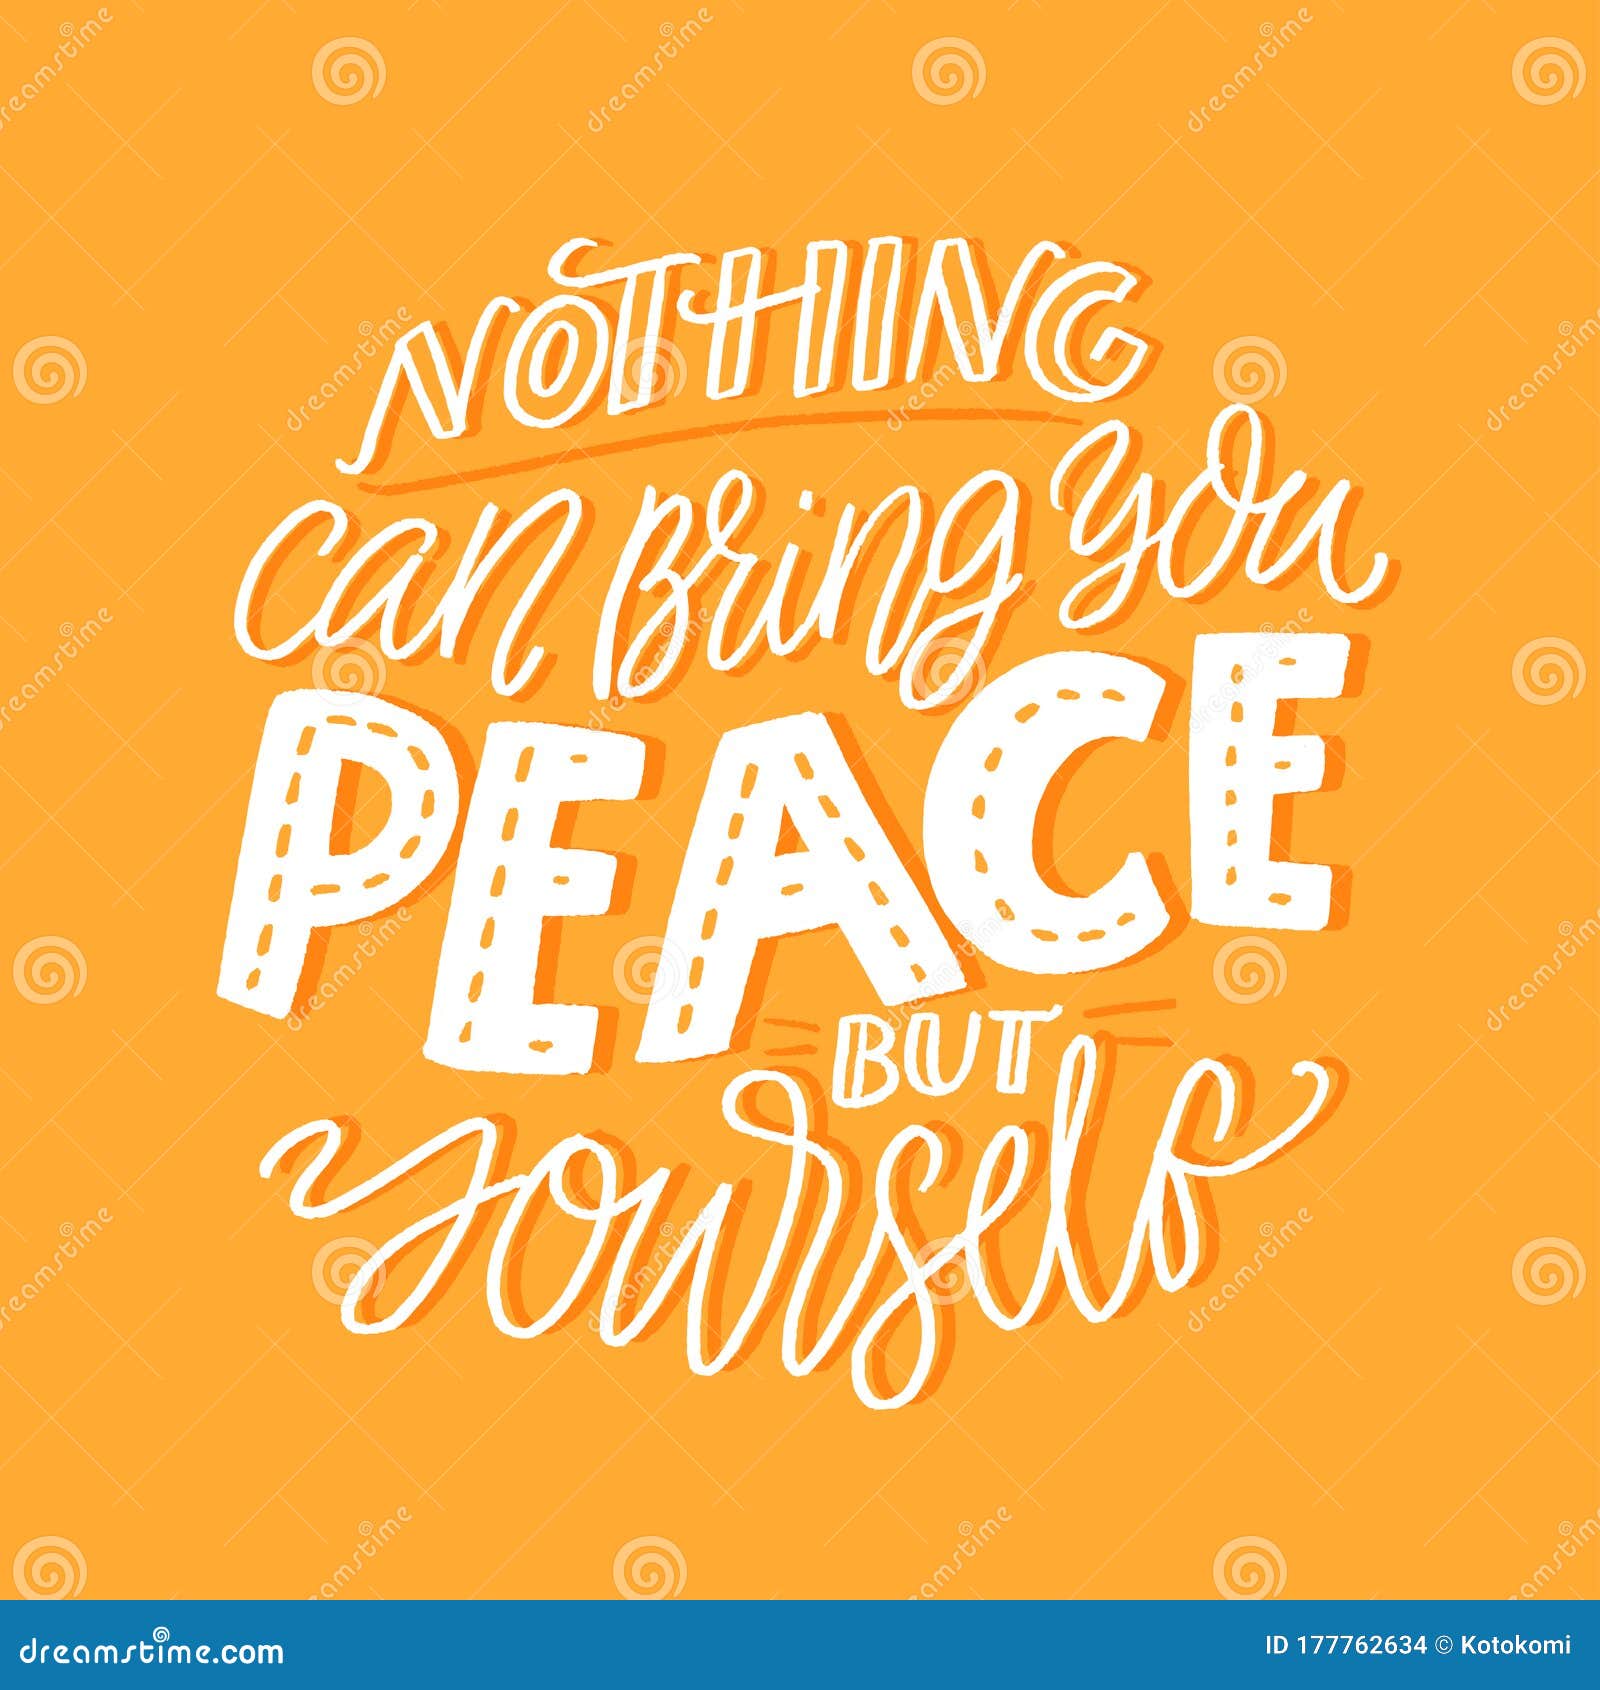 nothing can bring you peace but yourself. support quote about inner calm and mindfulness practice. selfcare slogan